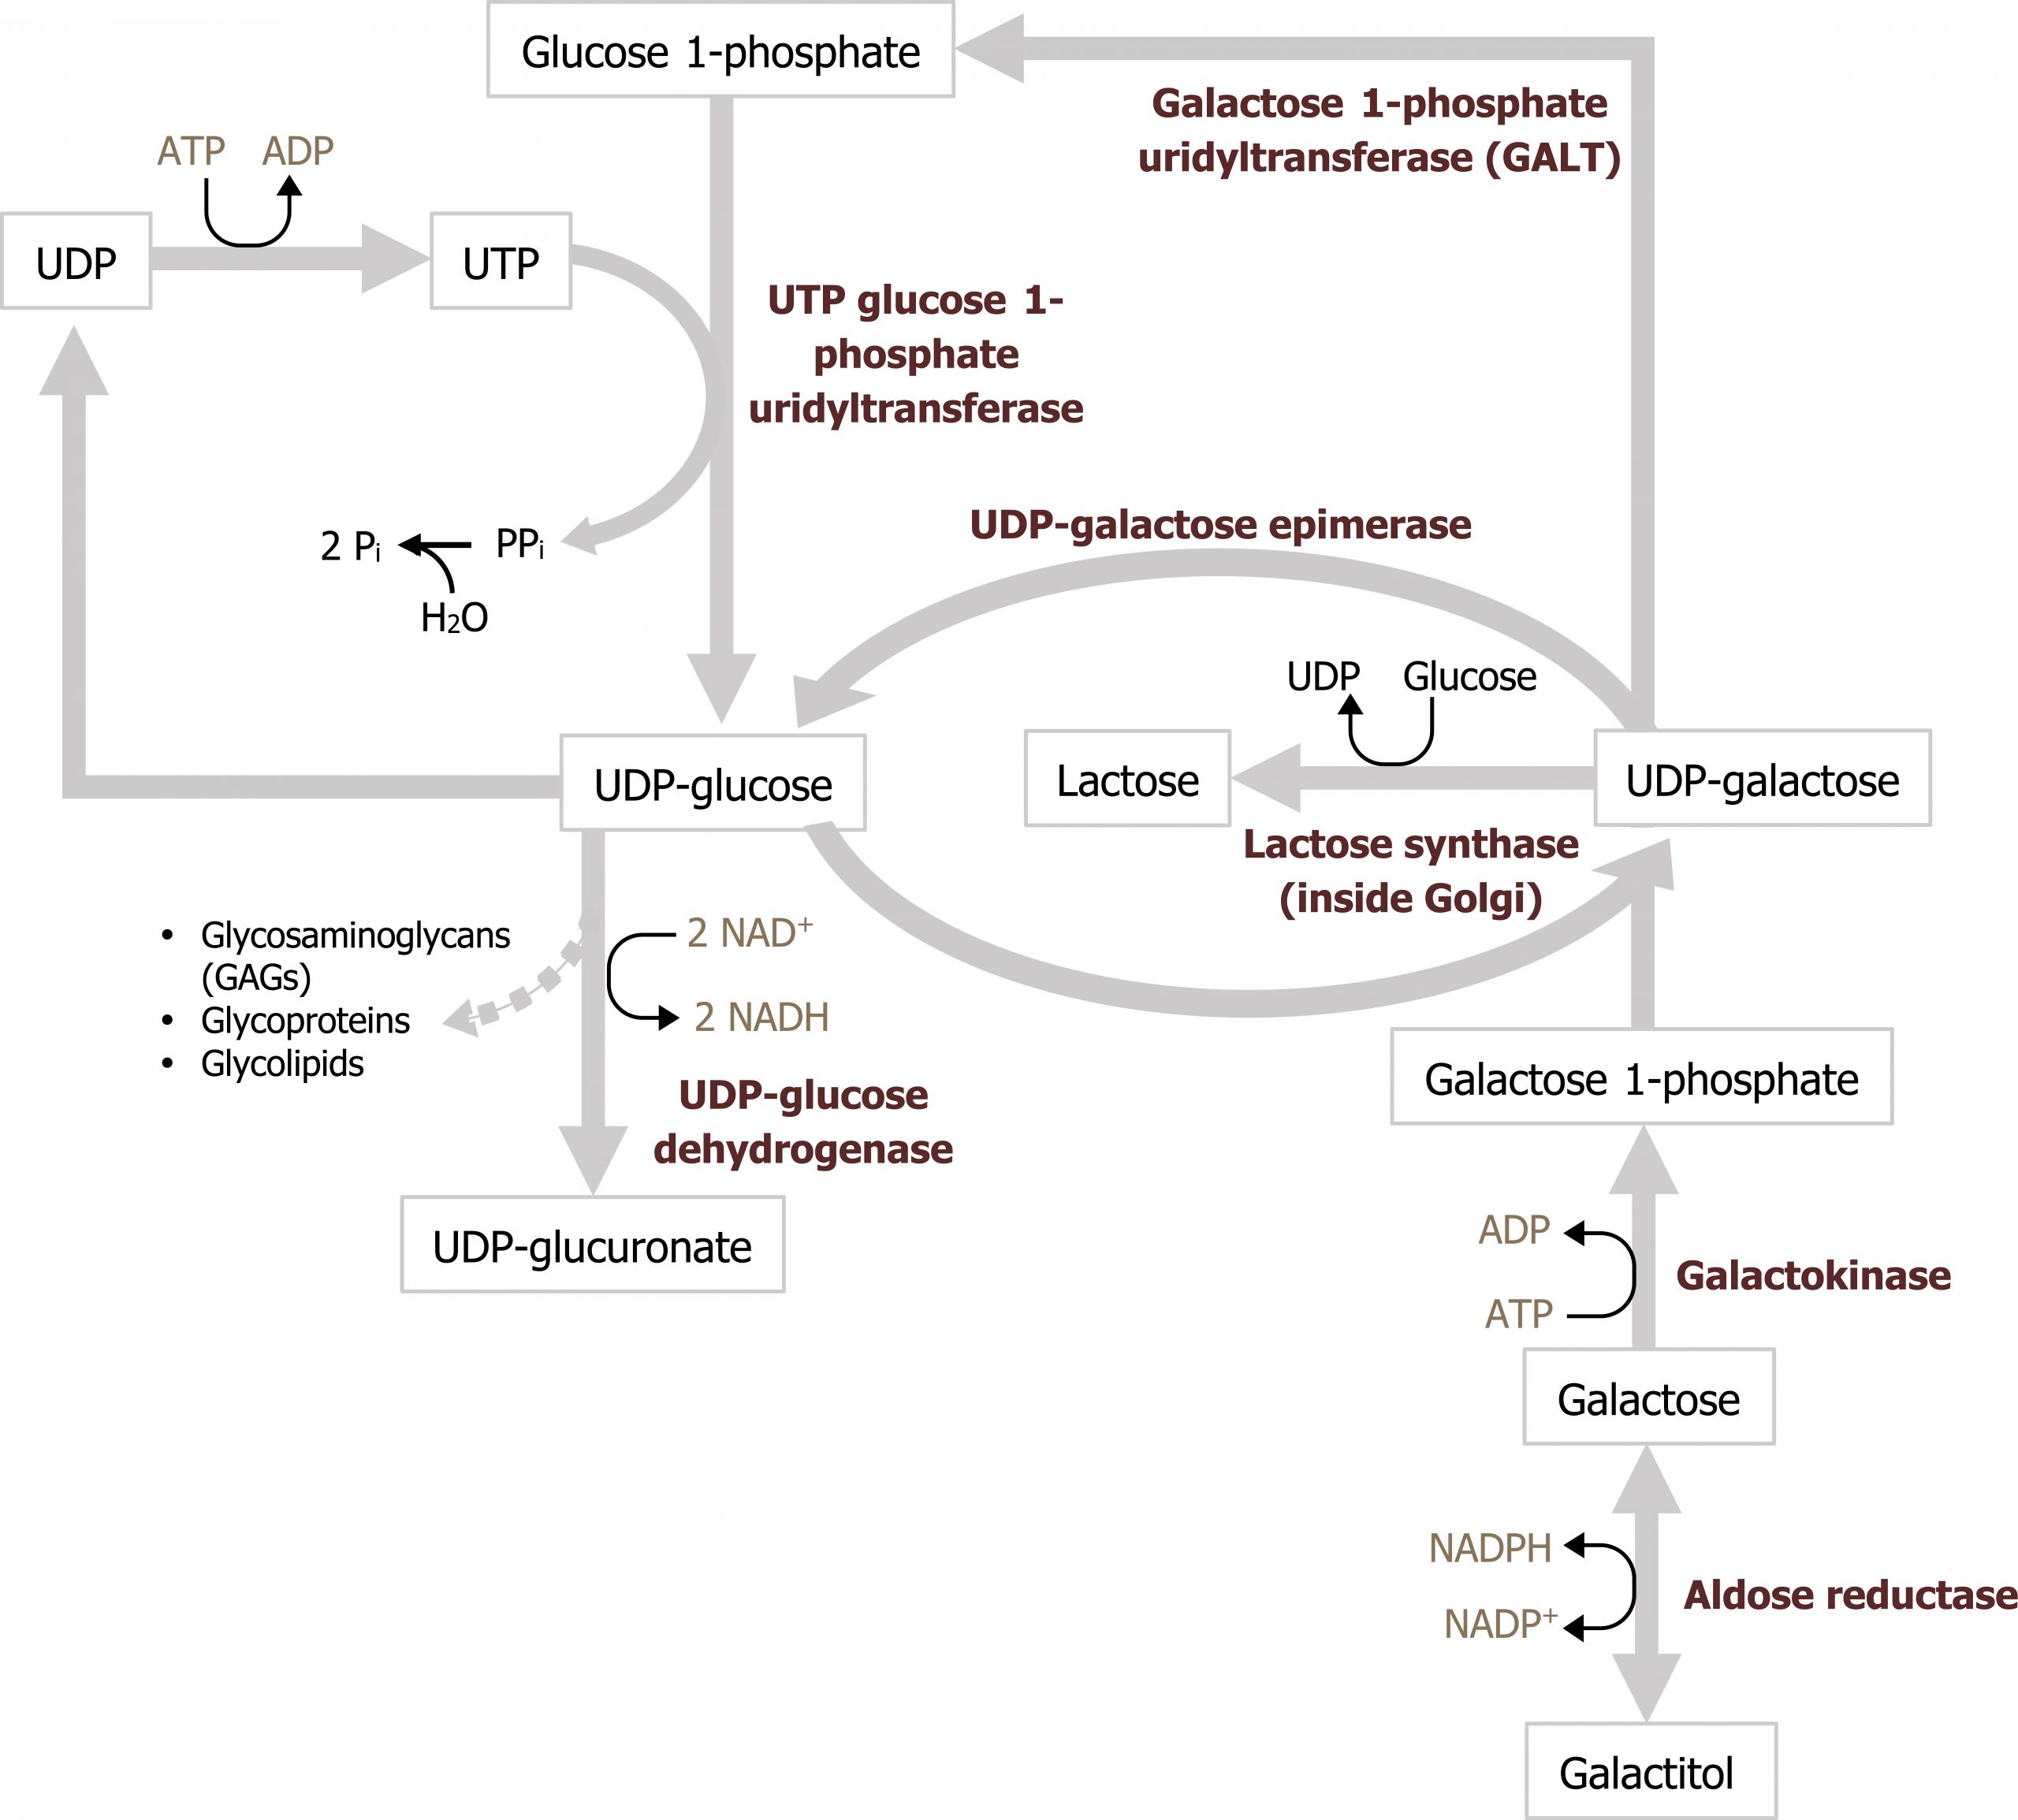 Galactitol bidirectional arrow enzyme aldose reductase with NADP+ bidirectional arrow NADPH to galactose arrow enzyme galactokinase with ATP arrow ADP to galactose 1-phosphate arrow UDP-galactose arrow enzyme galactose 1-phosphate uridyltransferase (GALT) to Glucose 1-phosphate arrow enzyme UTP glucose 1-phosphate uridyltransferase to UDP-glucose arrow enzyme UDP-glucose dehydrogenase with 2 NAD+ arrow 2 NADH and loss of glycosaminoglycans (GAGs), glycoproteins, and glycolipids to UDP-glucuronate. UDP-galactose arrow enzyme UDP-galactose epimerase to UDP-glucose arrow UDP-galactose. UDP-galactose arrow enzyme lactose synthase (inside Golgi) with Glucose arrow UDP to lactose. UDP-glucose arrow UDP arrow with ATP arrow ADP to UTP arrow touching between glucose 1-phosphate and UDP-glucose to PPi arrow with H2O addition to 2 Pi.